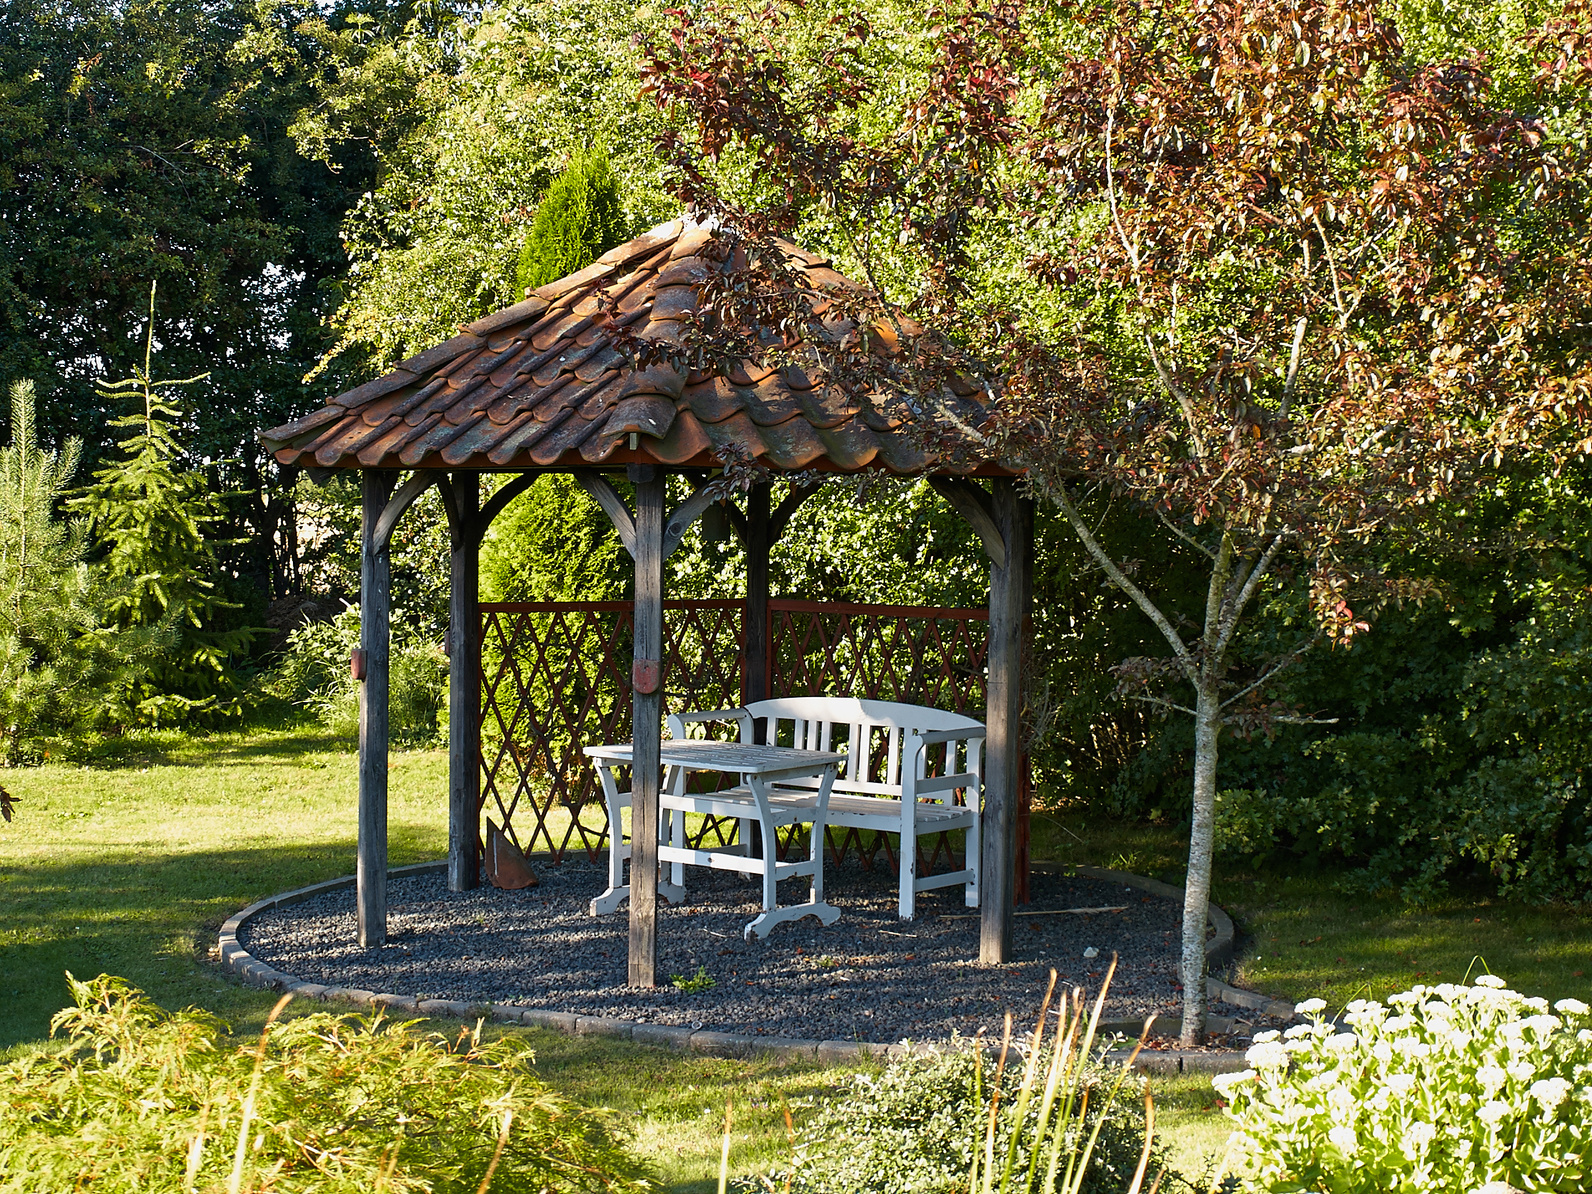 A wooden gazebo under some trees